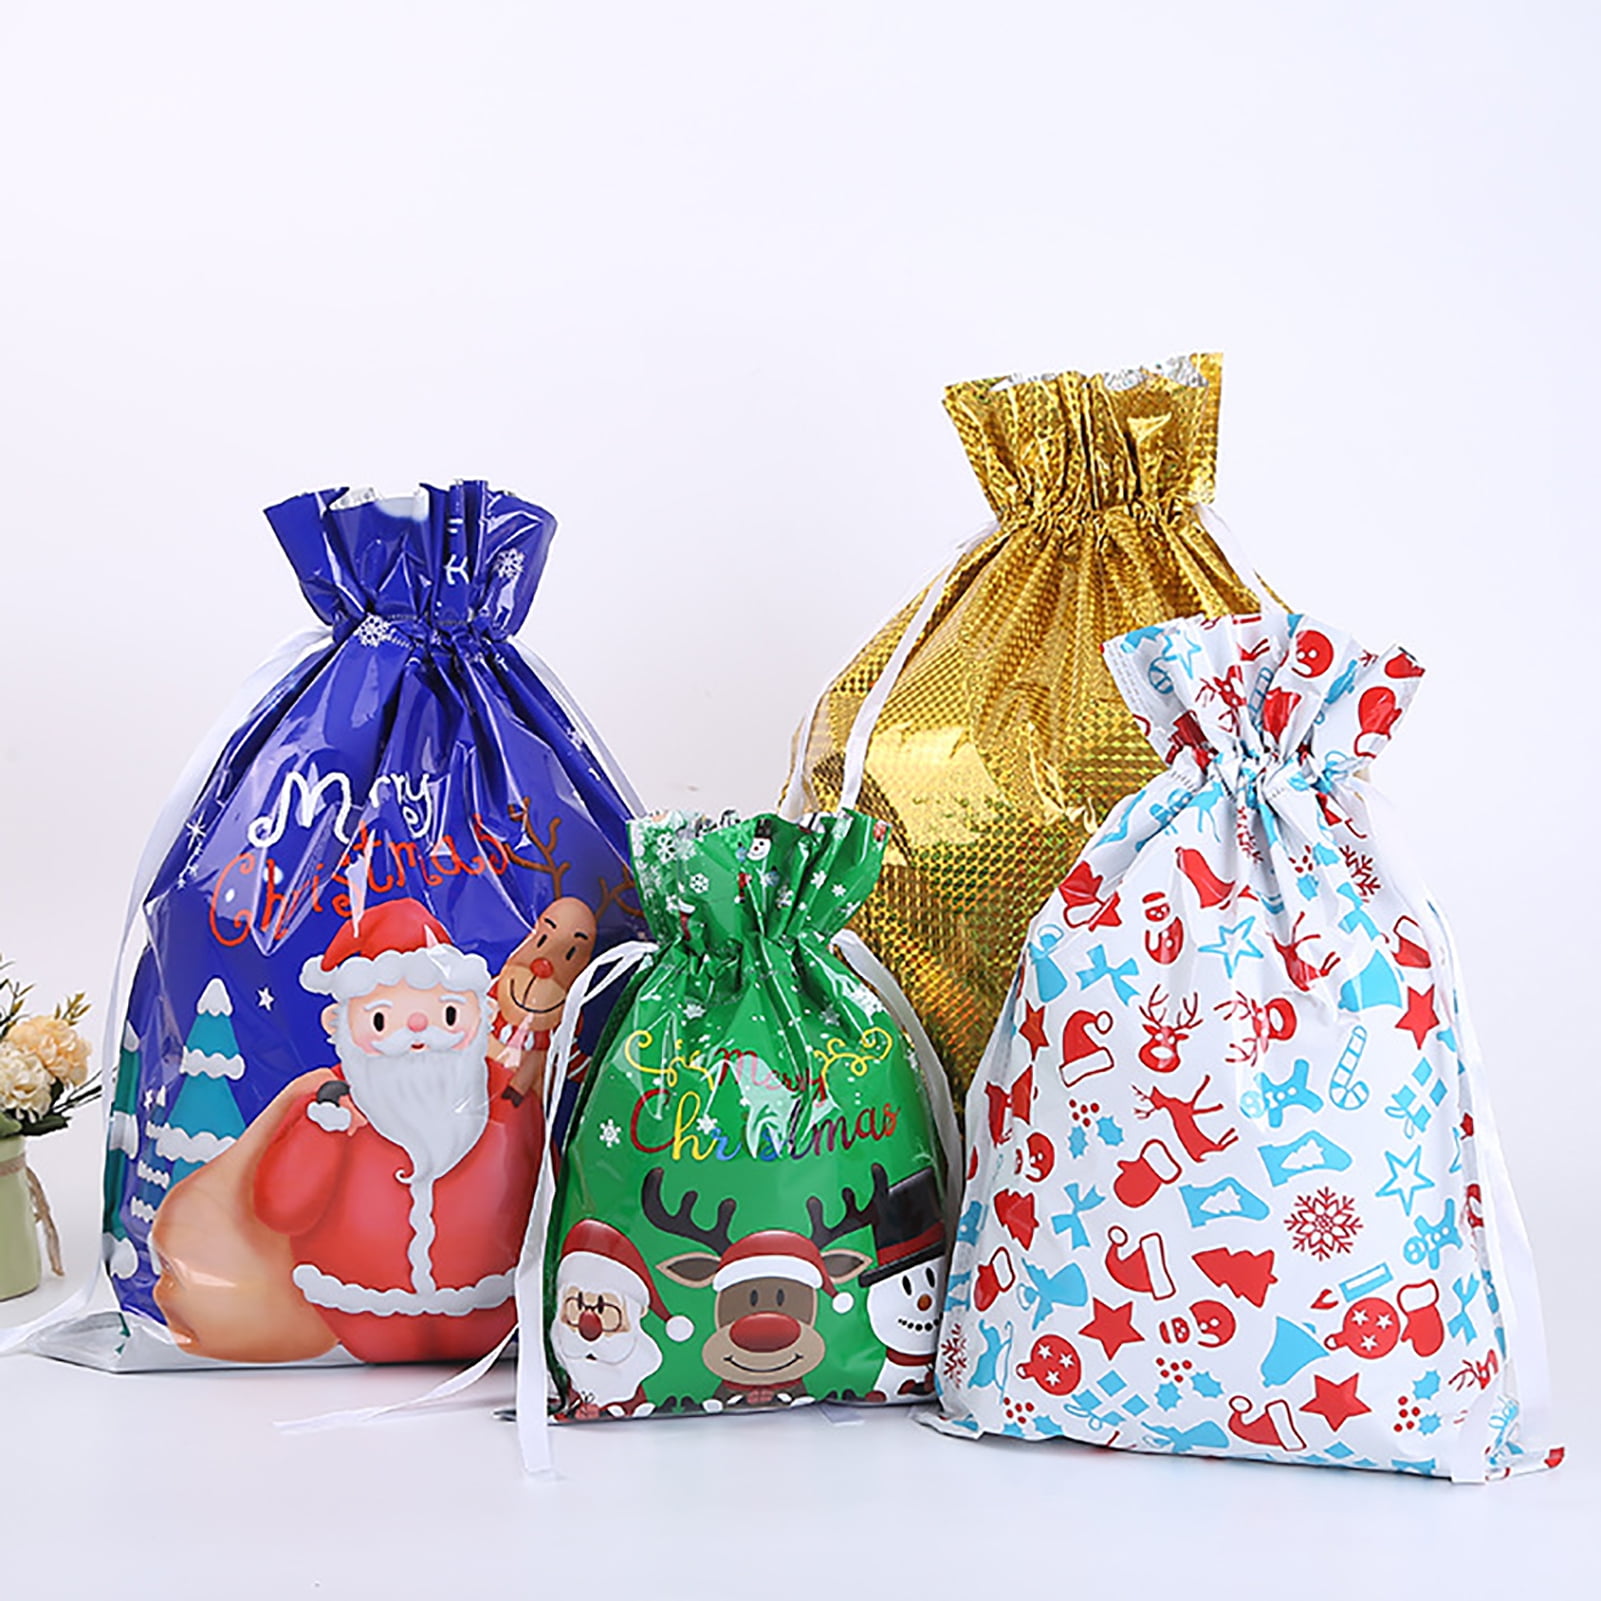 Cabilock 30pcs Christmas Gift Wrapping Bags Holiday Treats Bags Christmas Party Favor Pouch Goody Bags with Ribbon Ties 